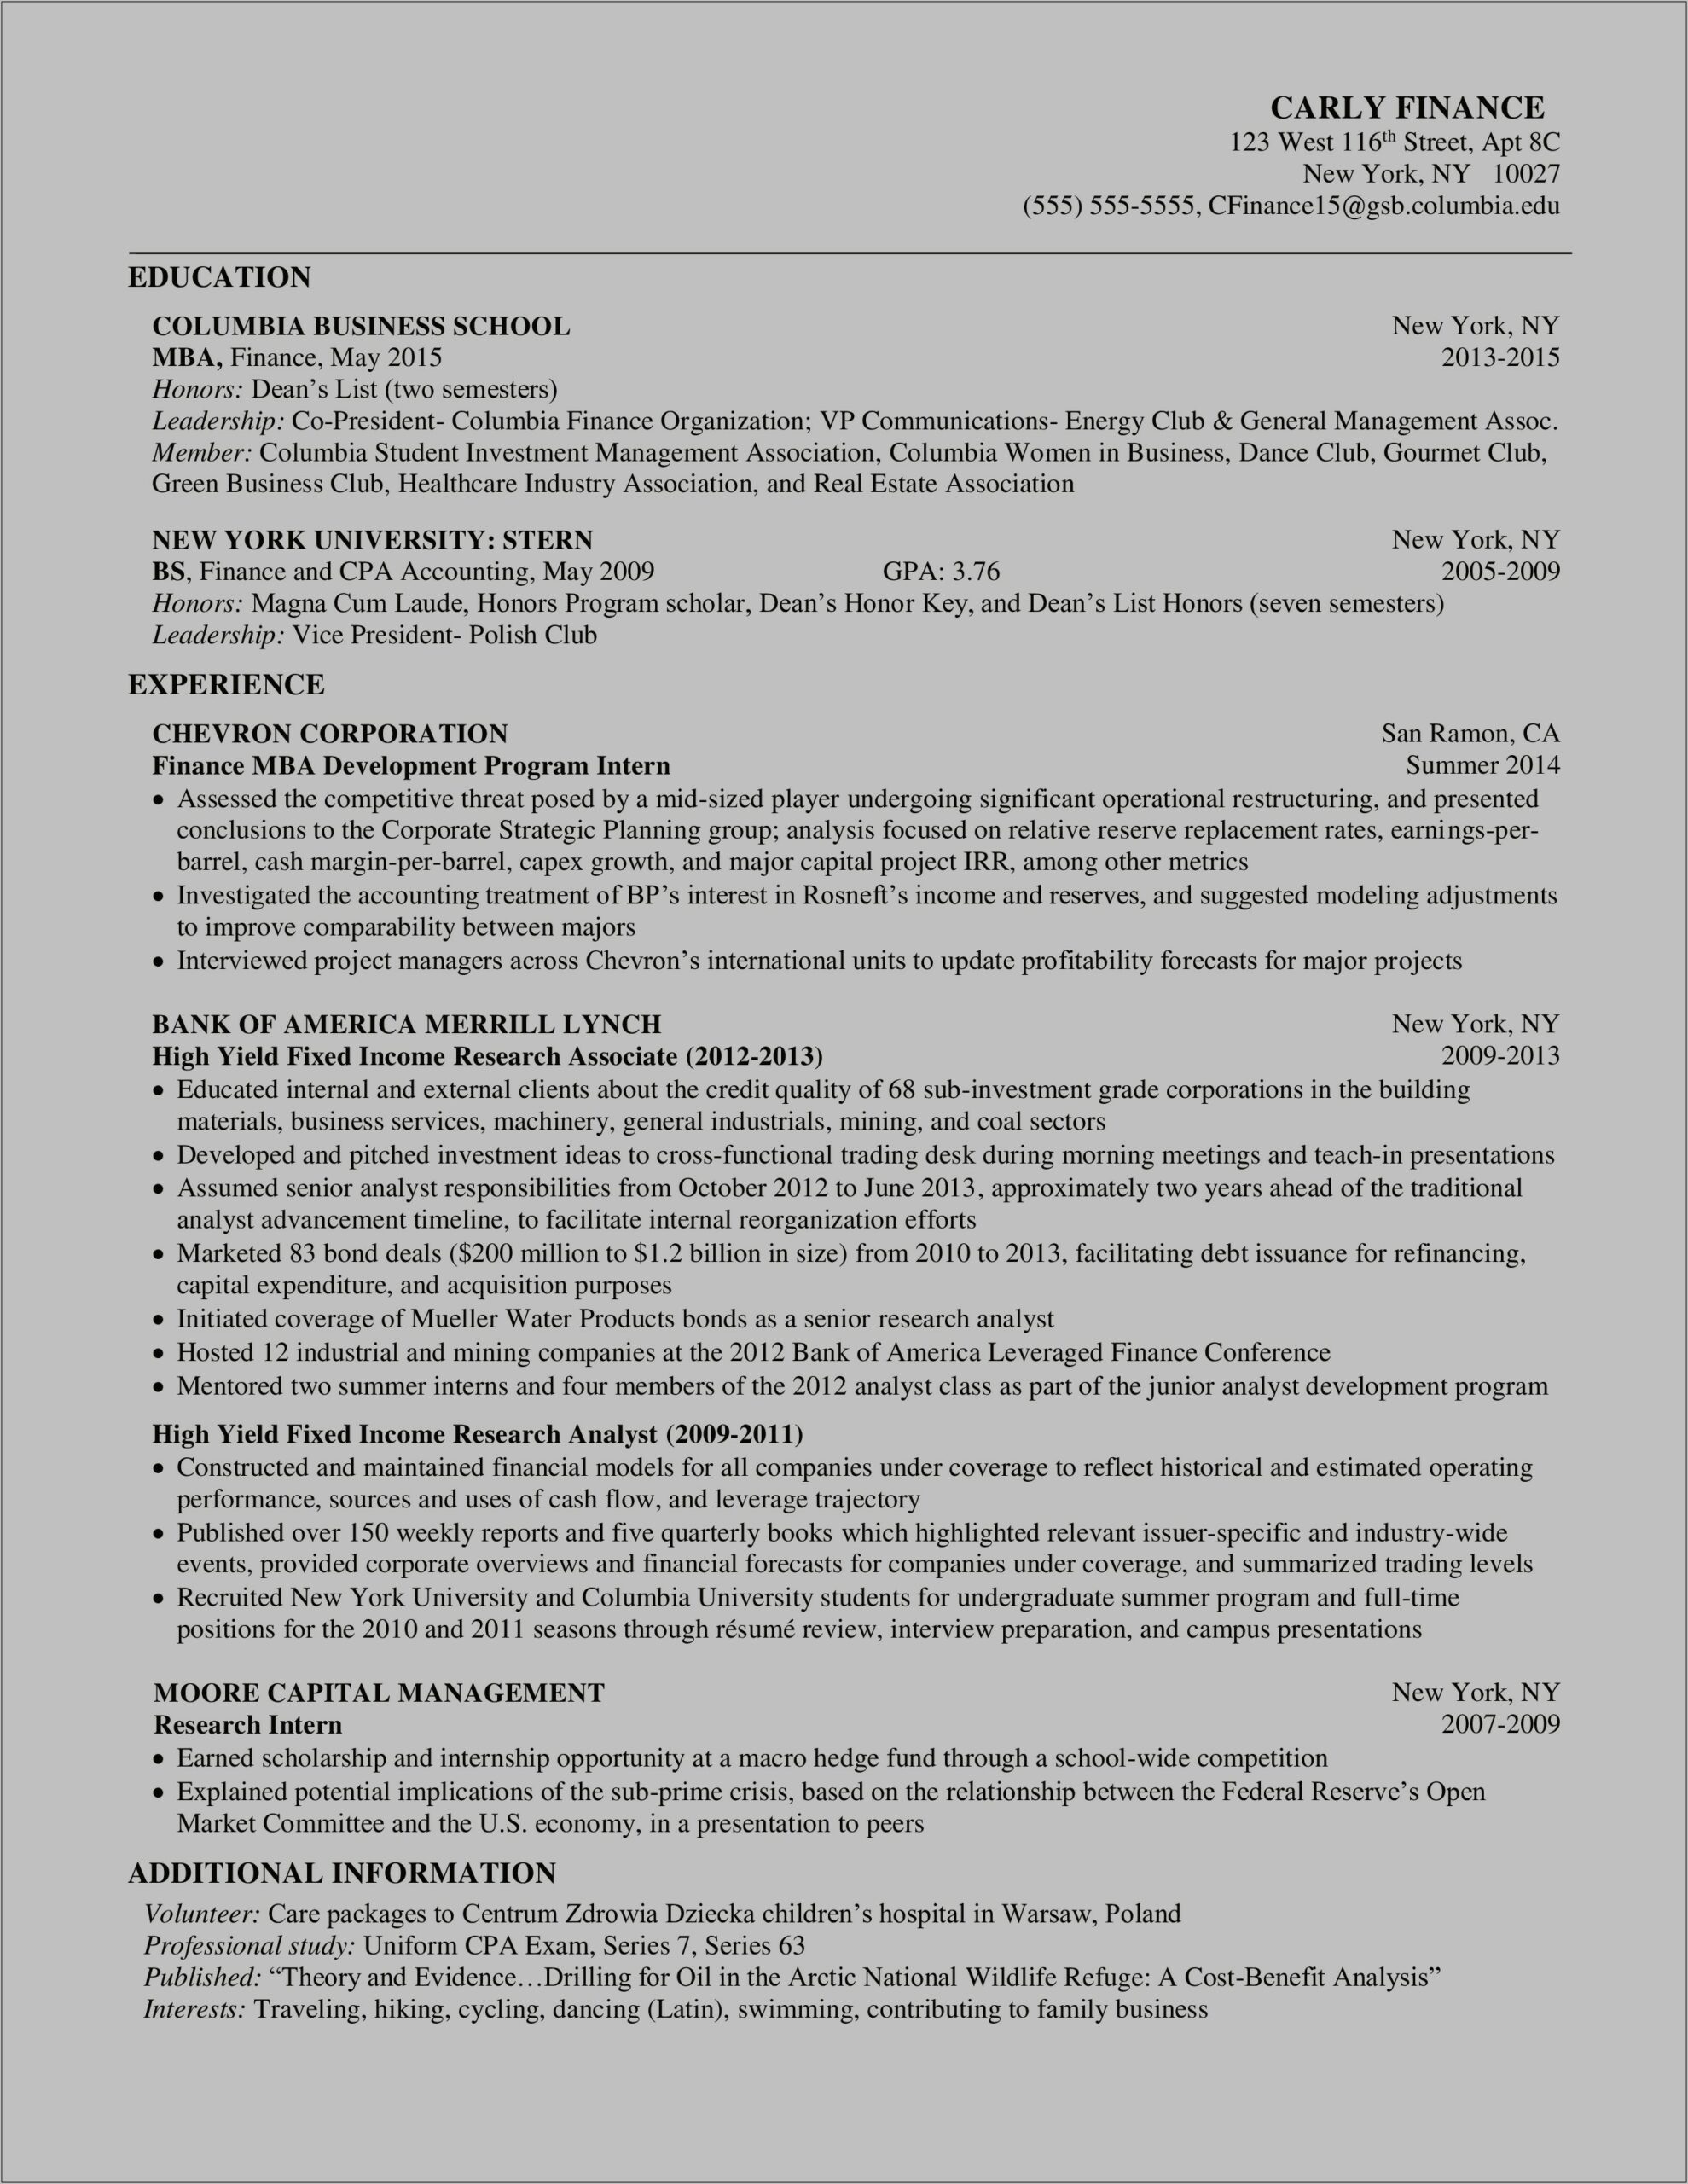 Business School Resumes Vs Typical Resume